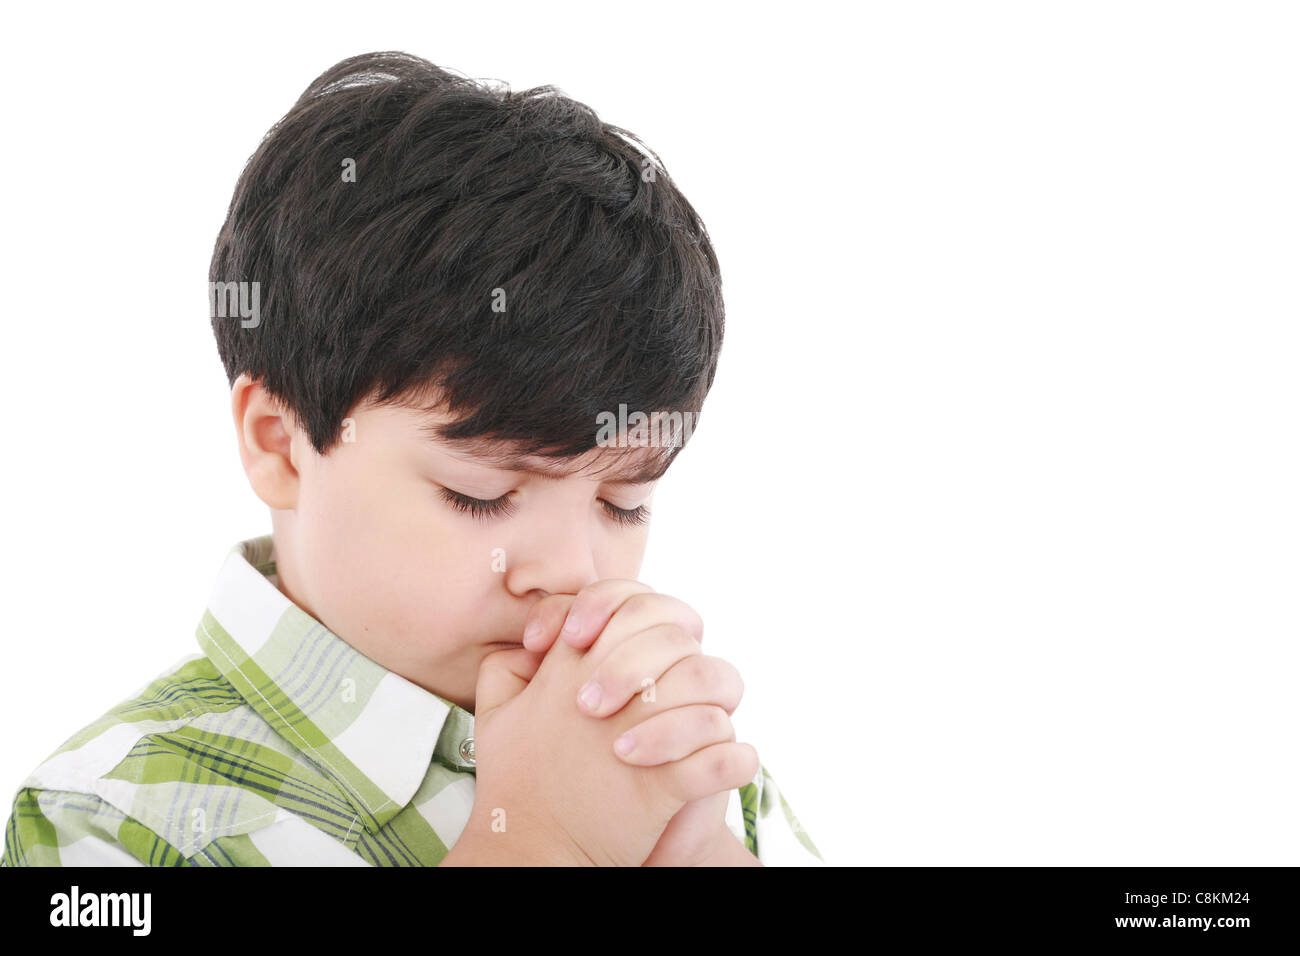 A boys prays earnestly to his creator in heaven Stock Photo